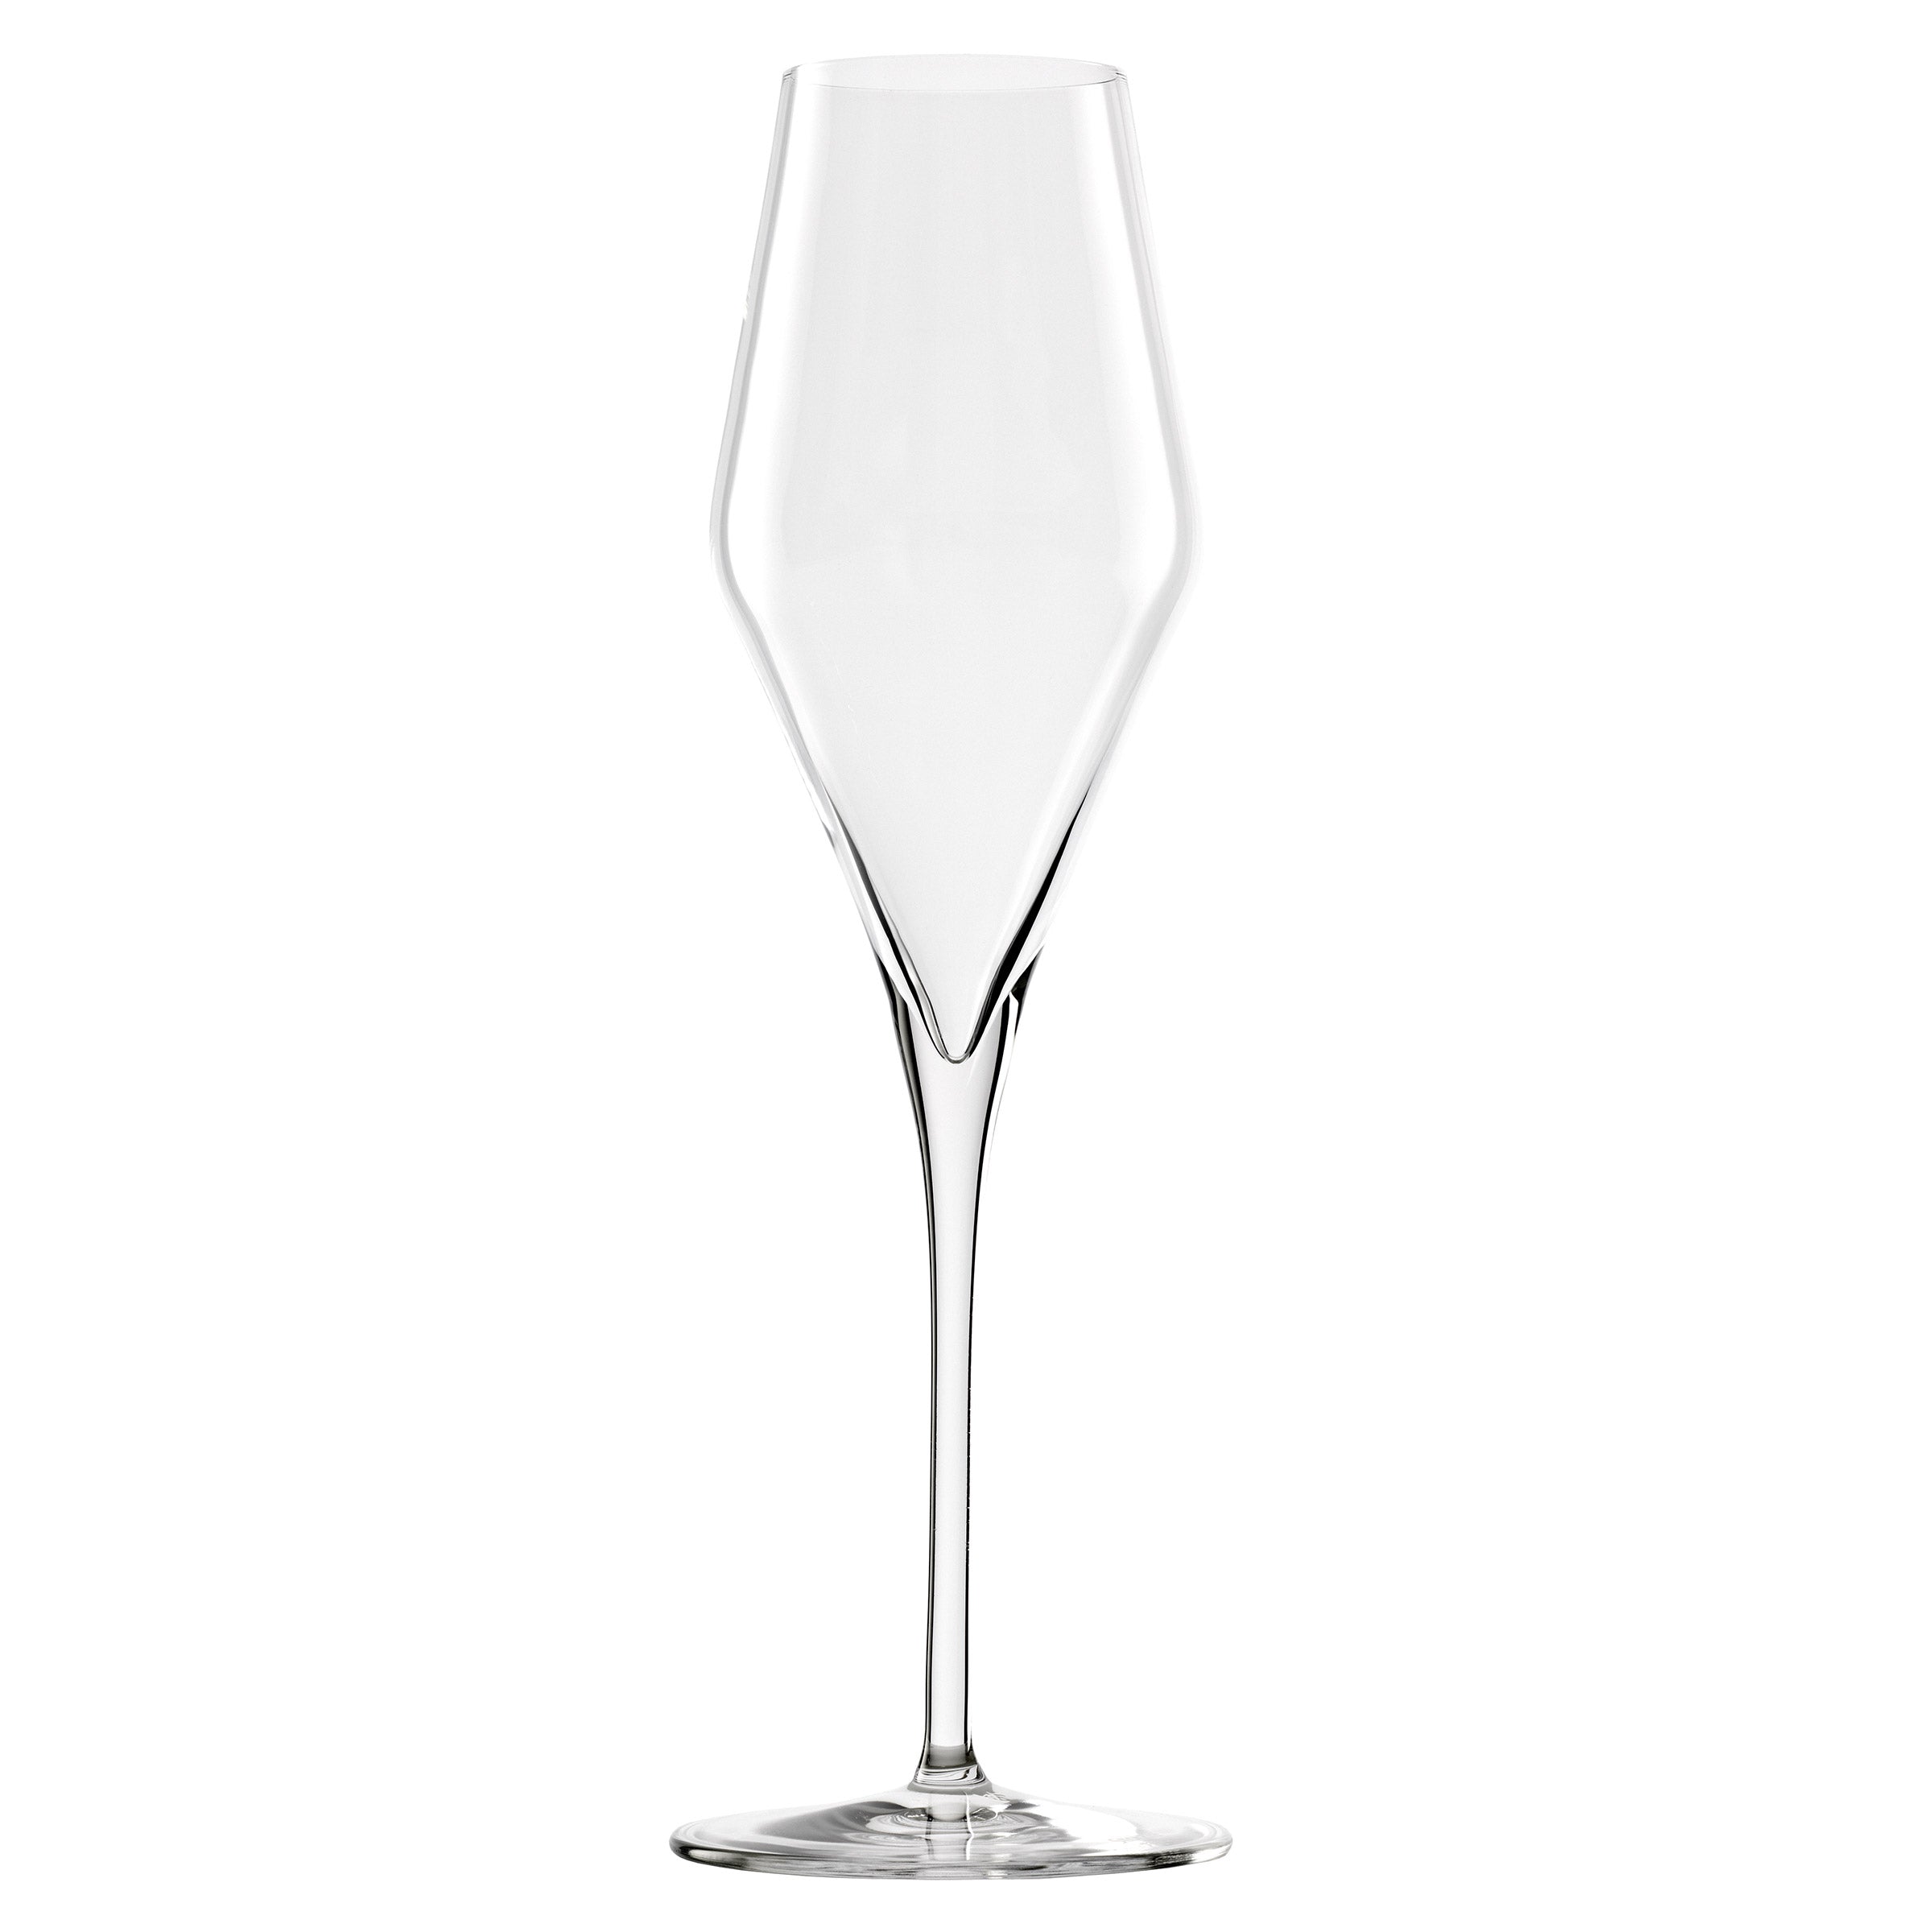 Highlight Champagne Flutes with LED Lights, Set of 2